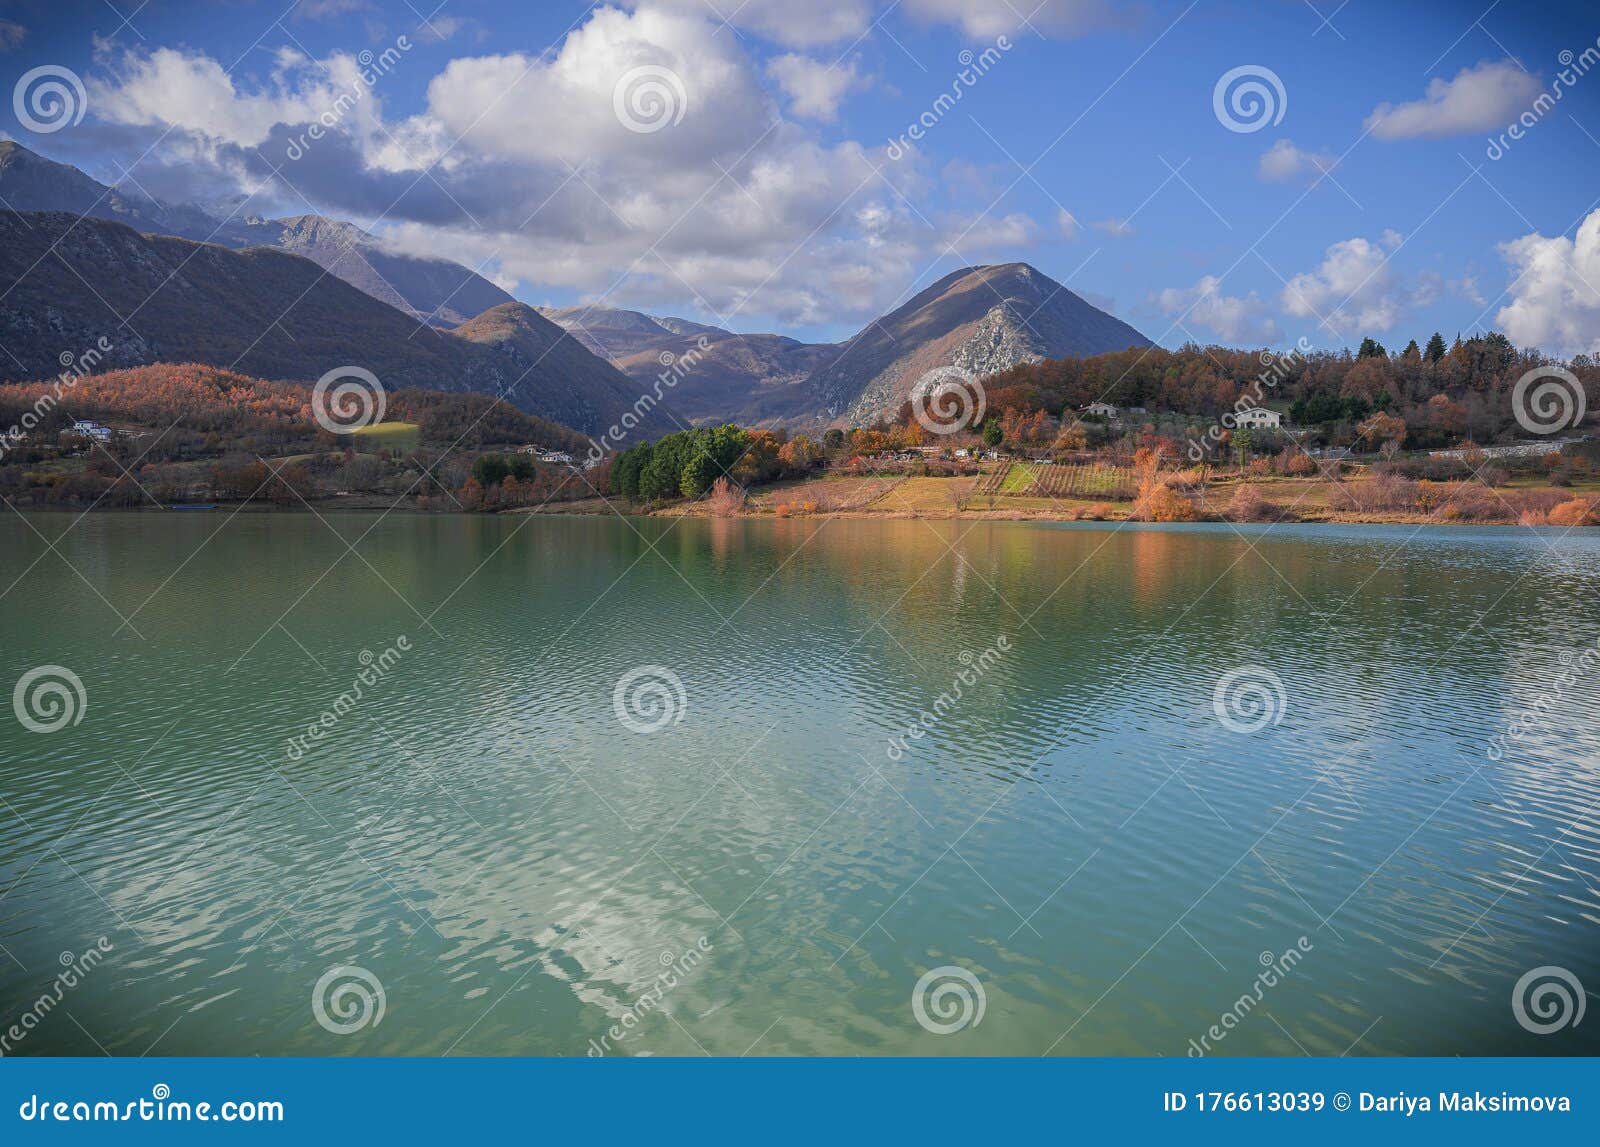 Beautiful Landscape with Castel San Vincenzo Lake in Molise, Italy ...